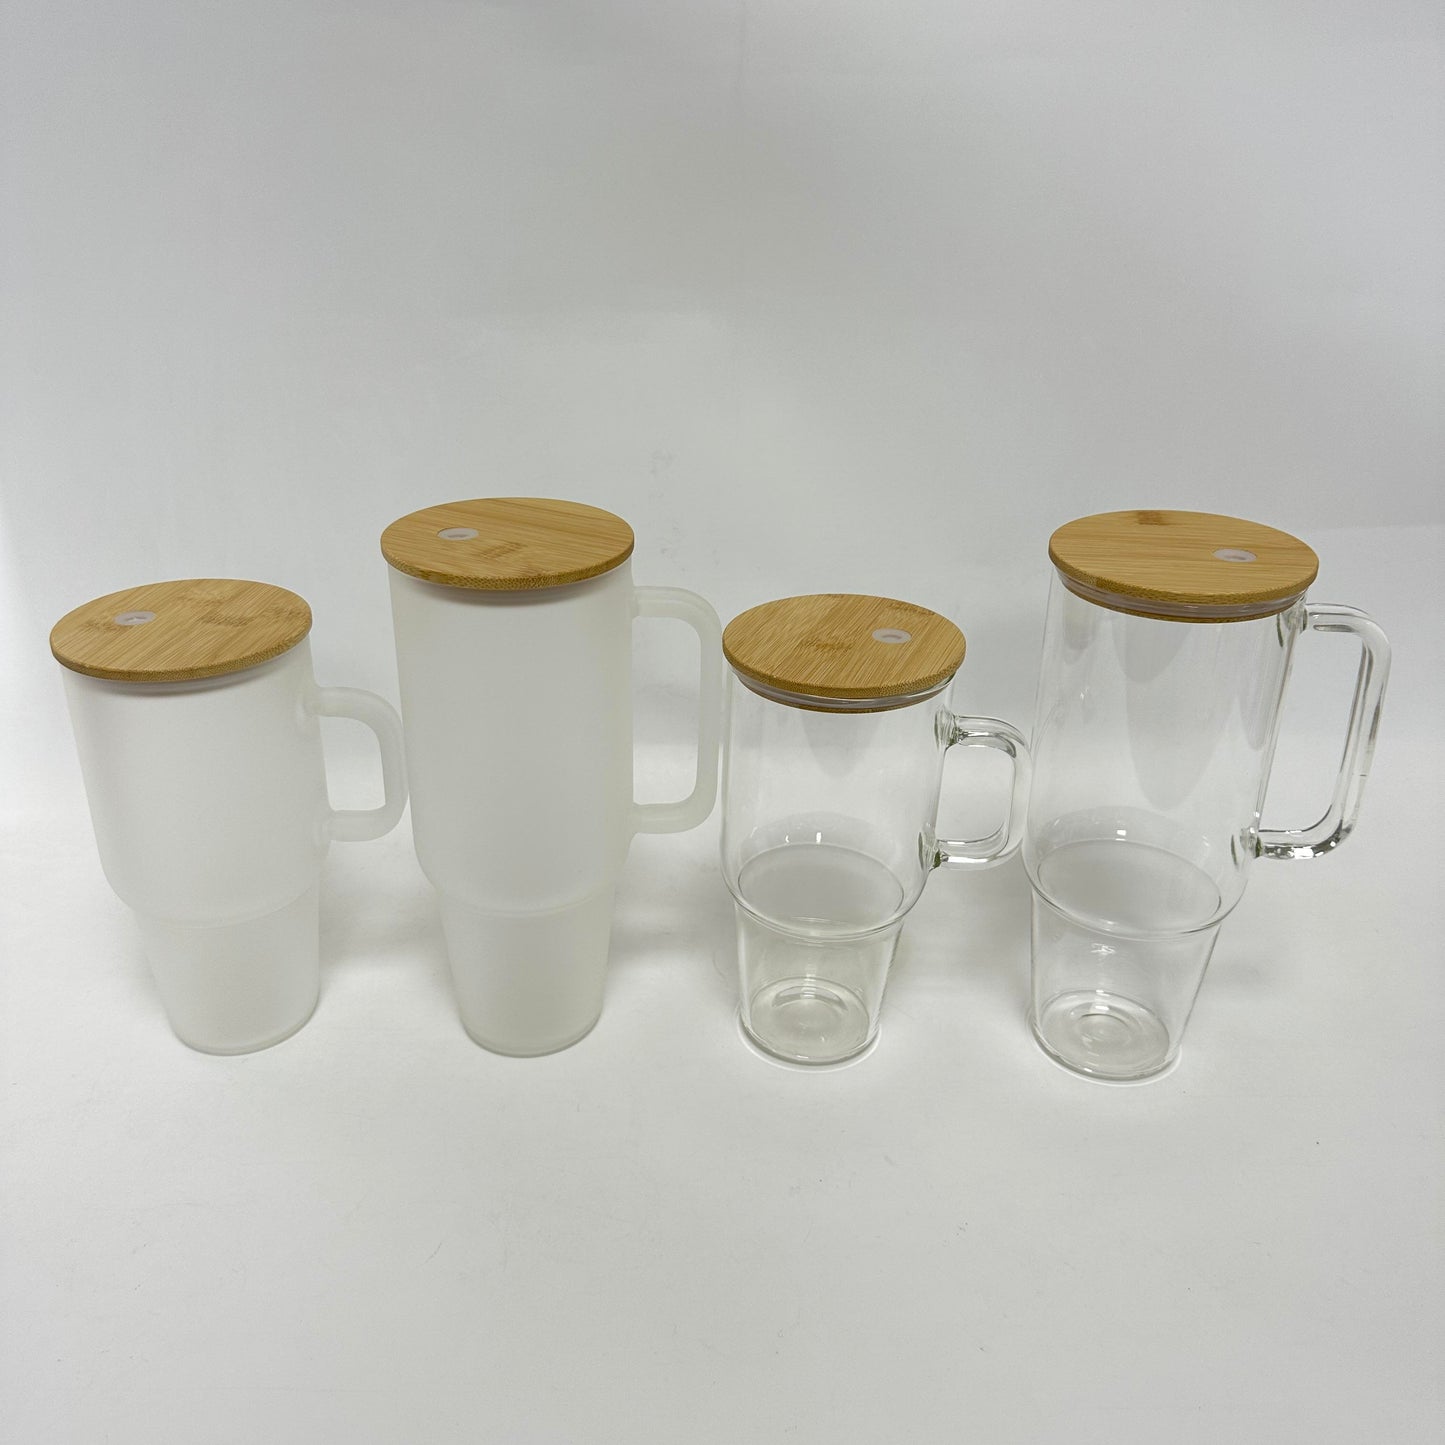 Us warehouse wholesale 32oz/40oz sublimation clear/frosted glasses tumbler Stanley dupes Can glass